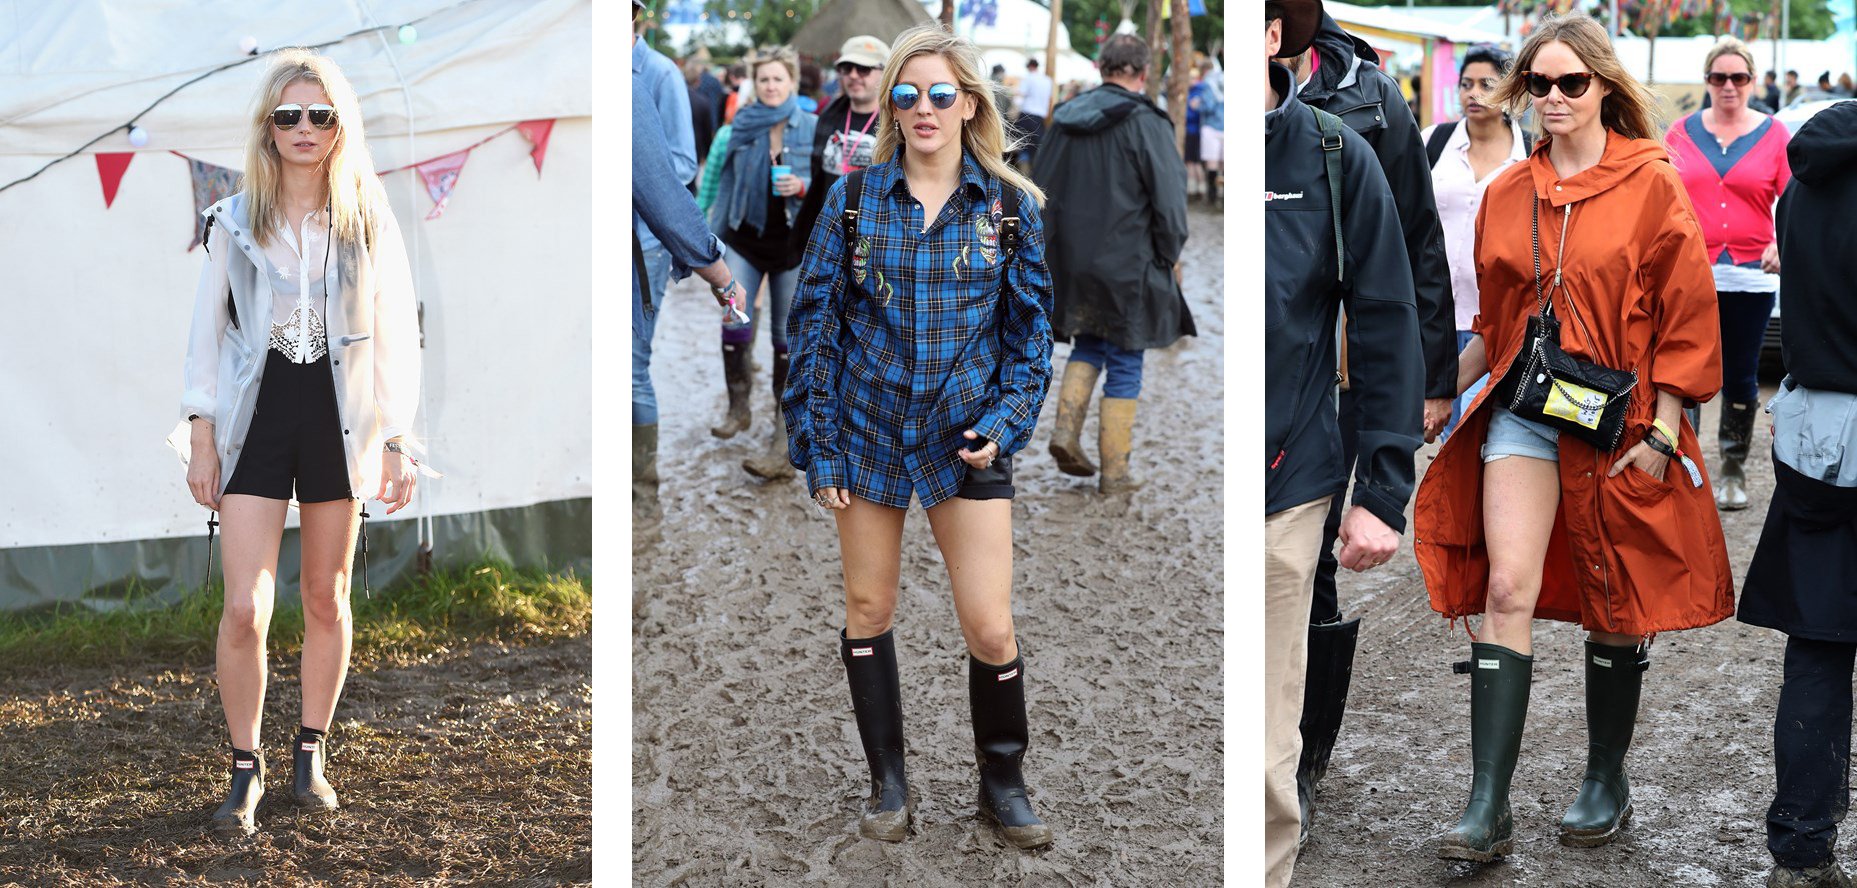 boots for a festival